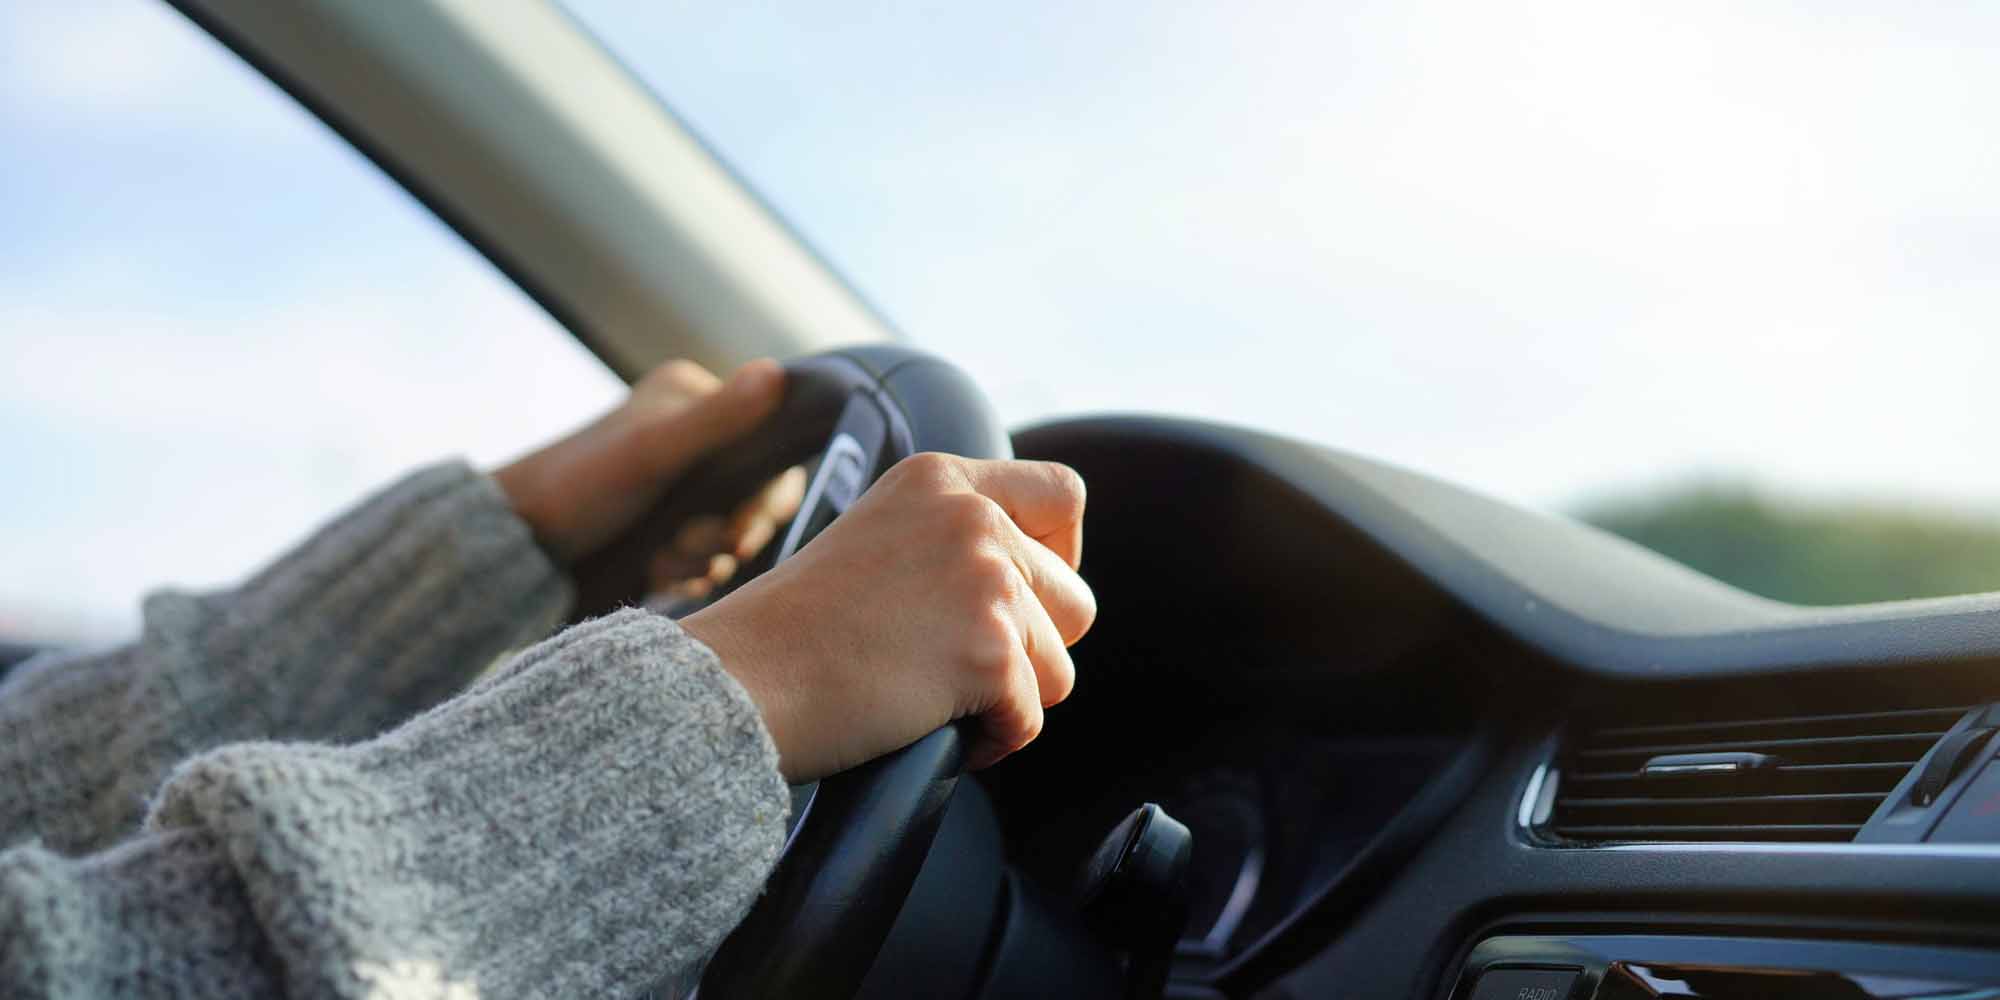 Driving – the controlled operation and movement of a vehicle.